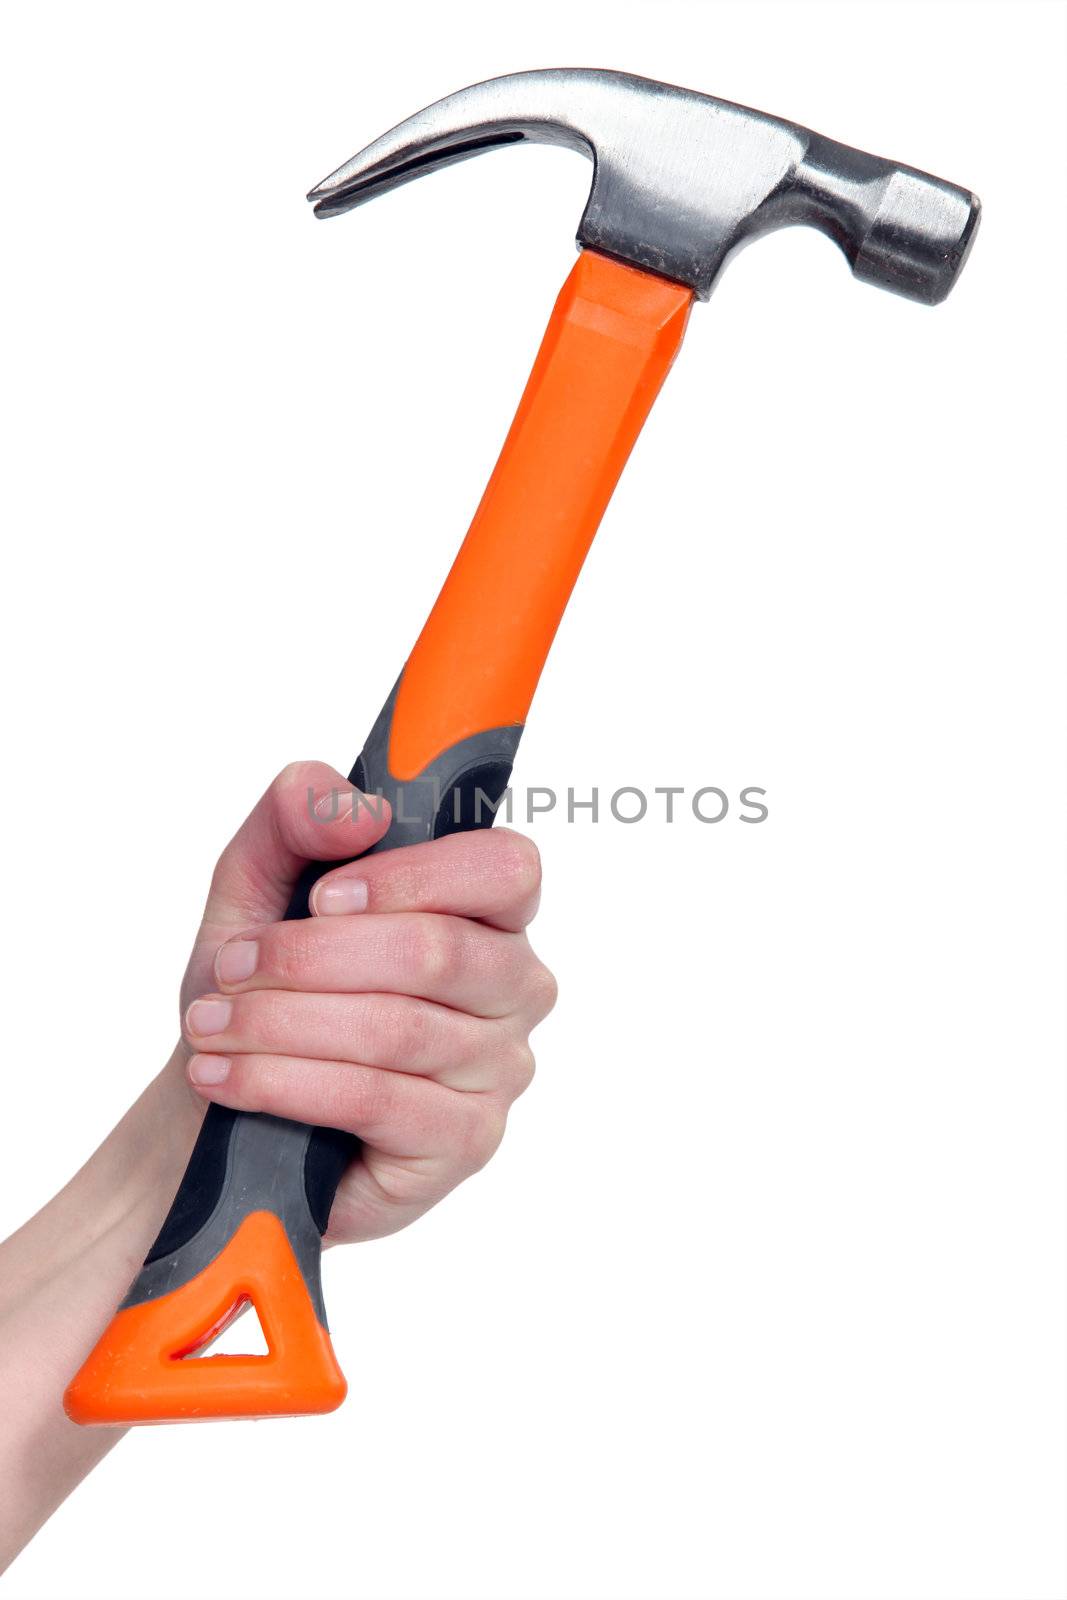 A hand holding a hammer. by phovoir